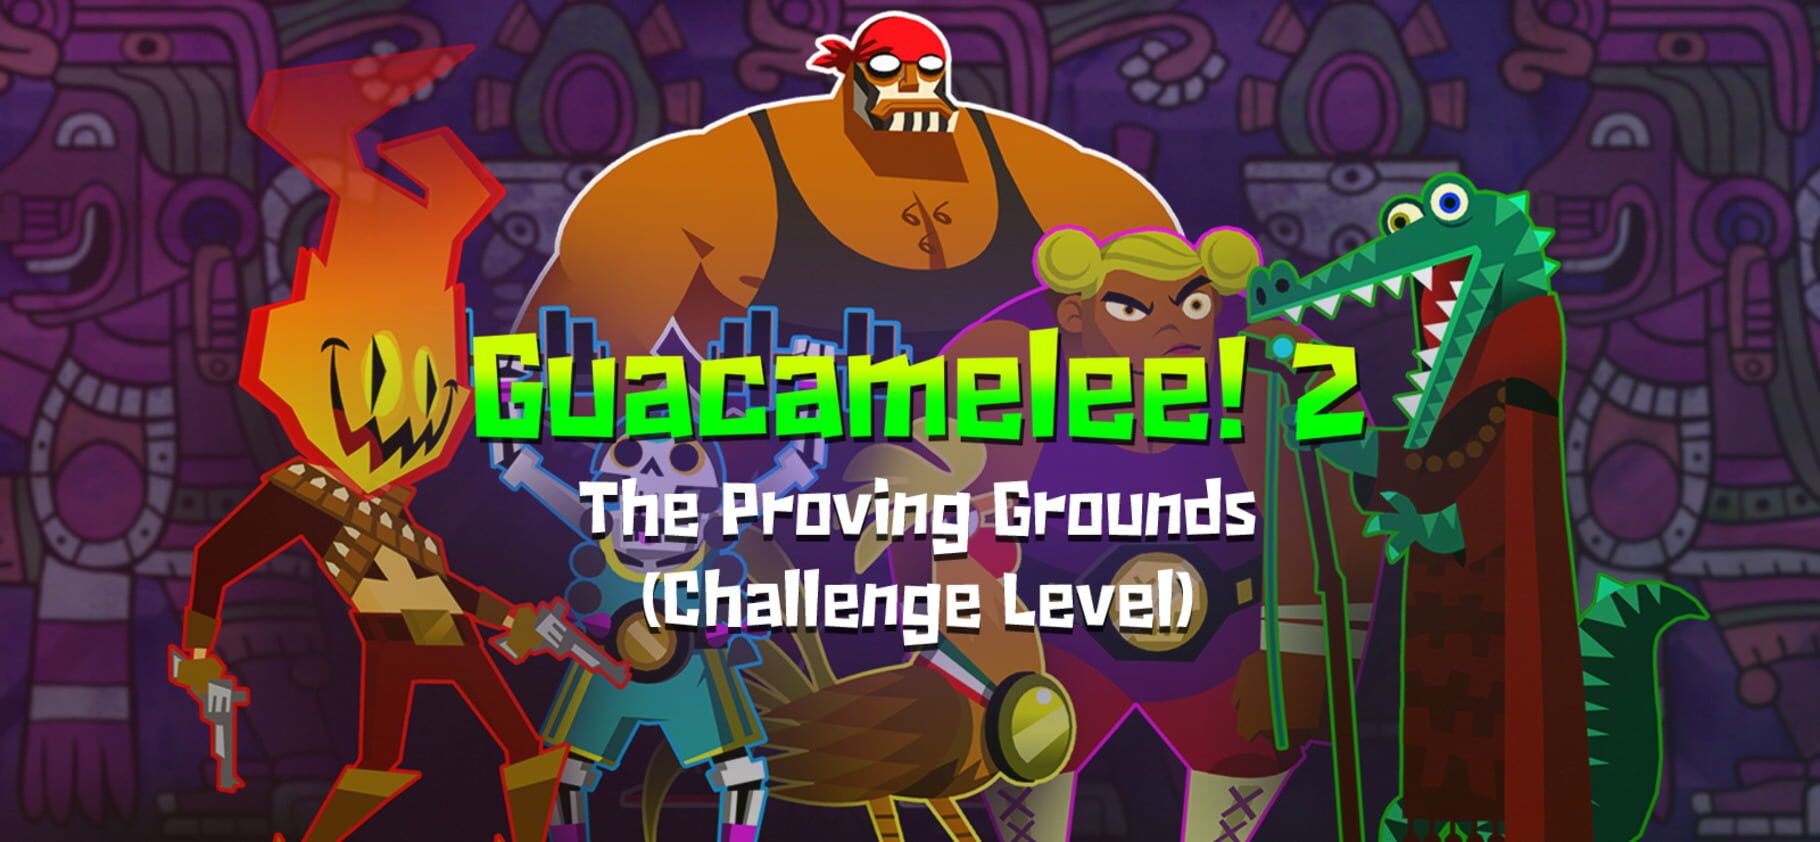 Guacamelee! 2: The Proving Grounds (Challenge Level) artwork